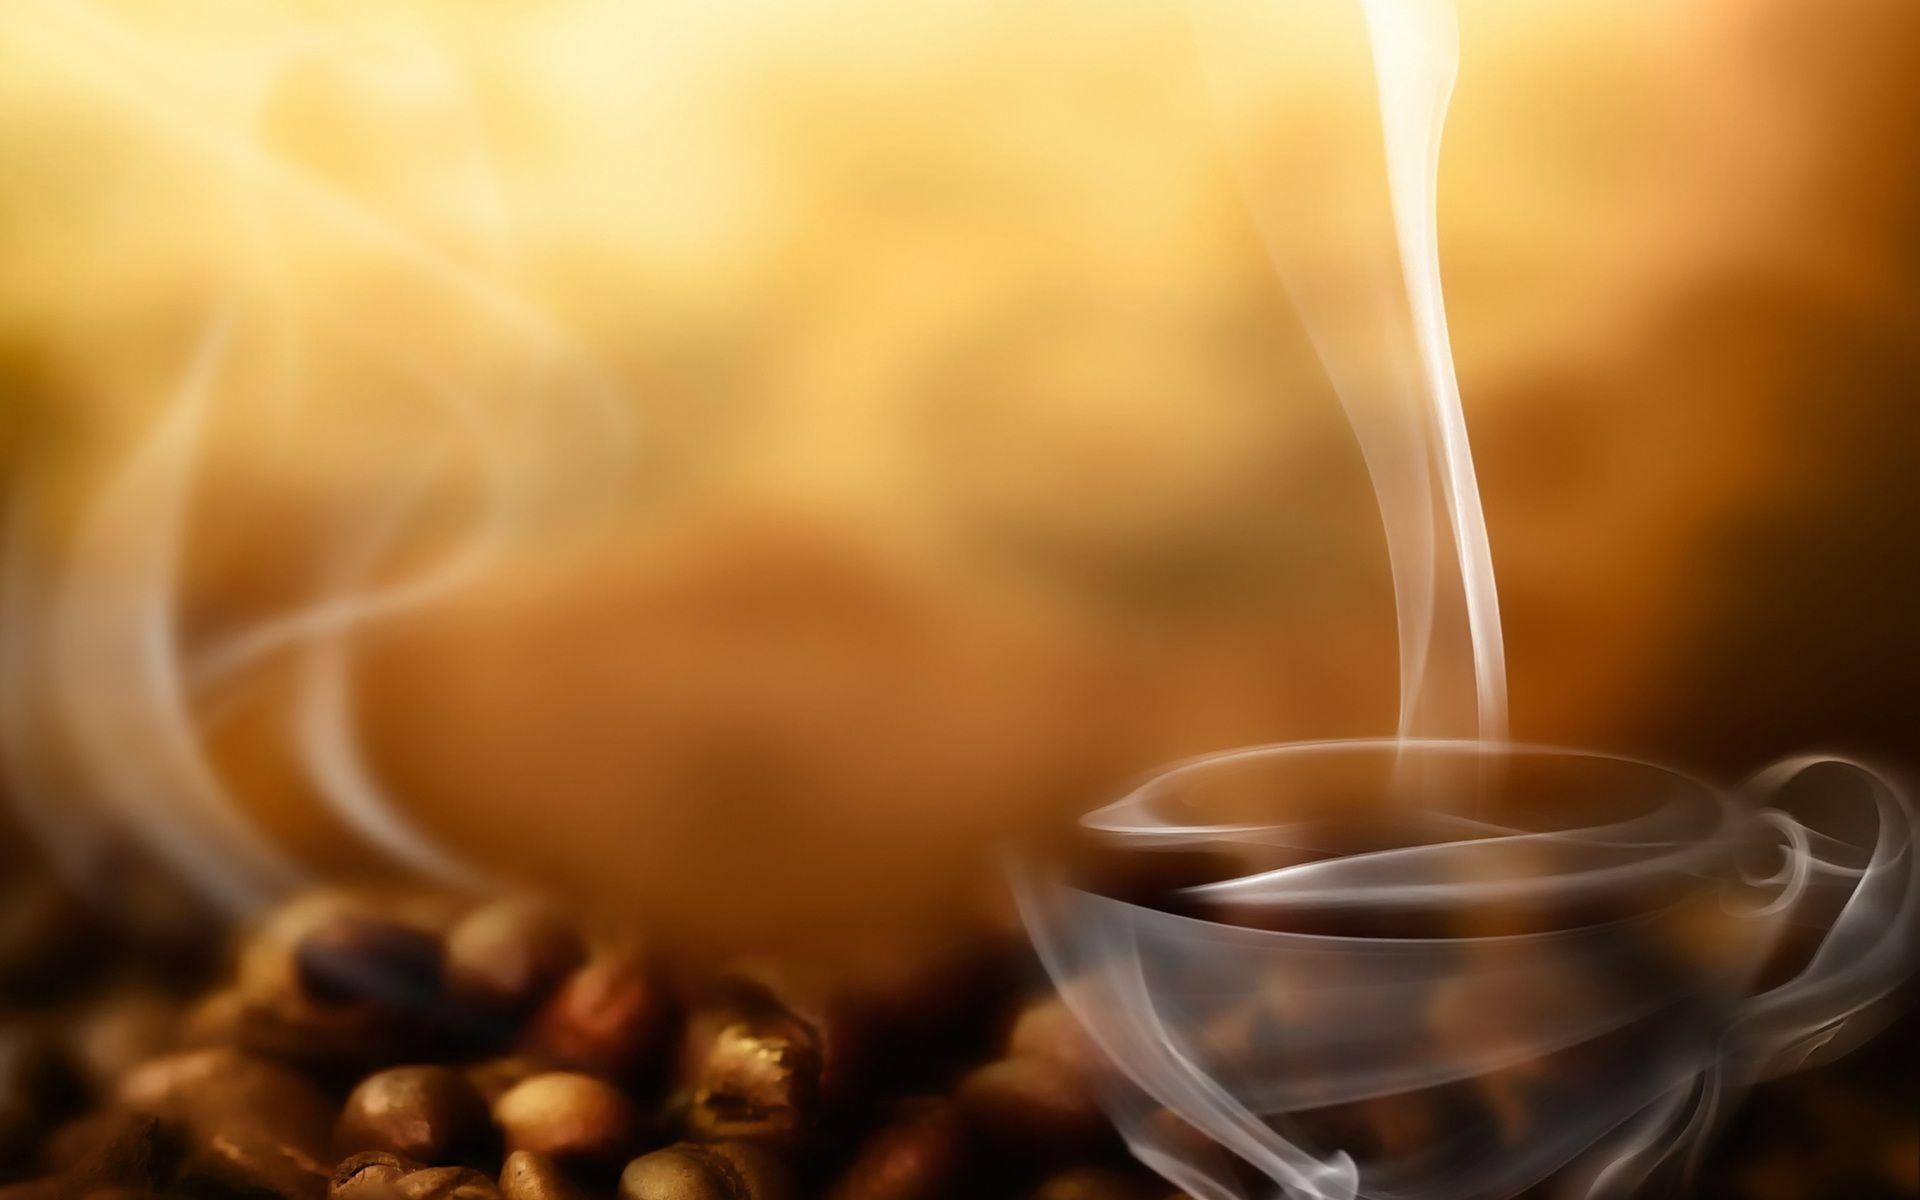 coffee wallpaper 7973. Unquenchable thirst. Coffee